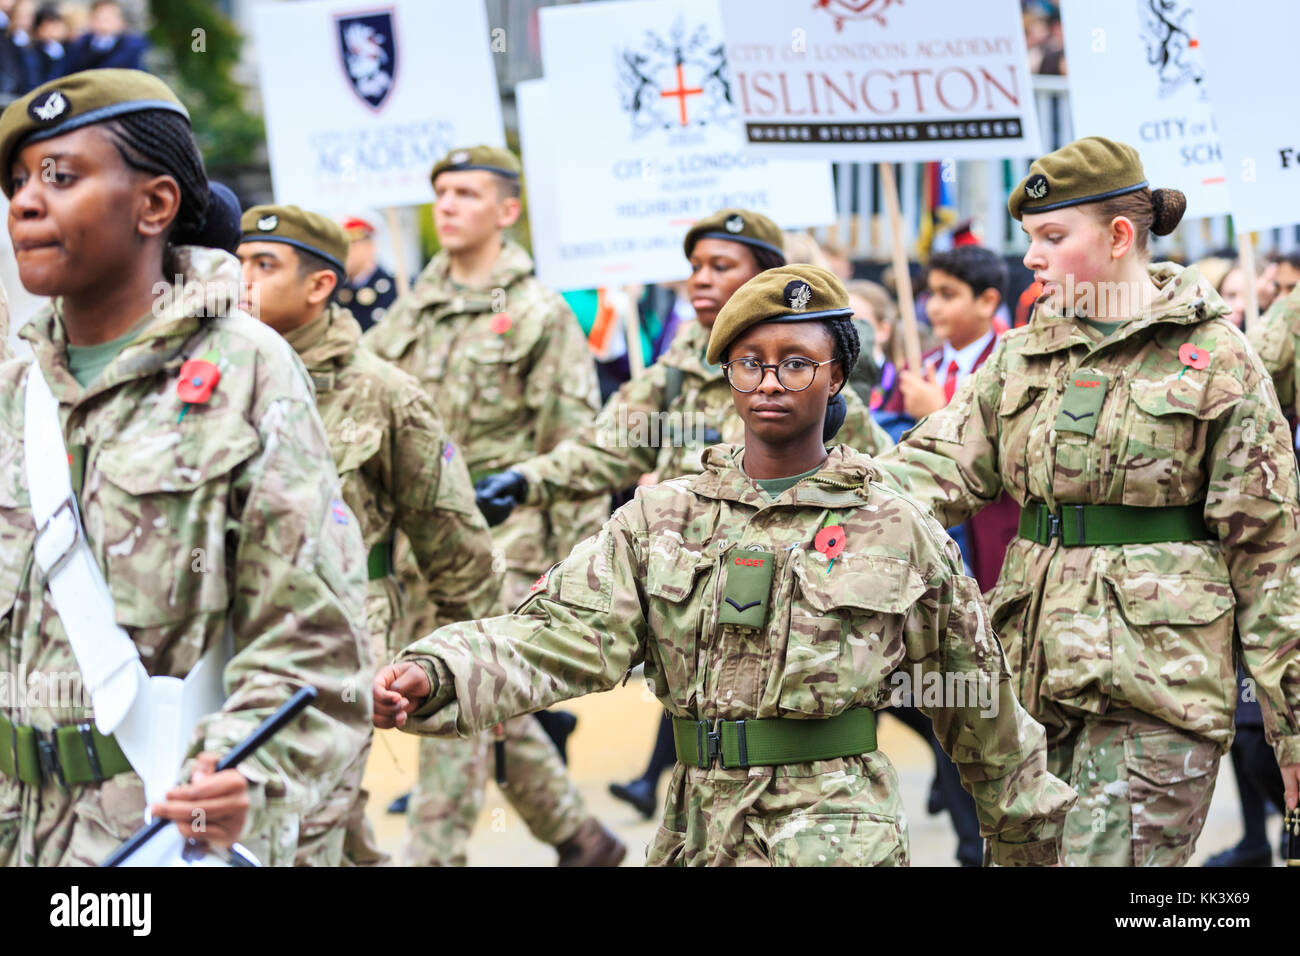 A young black female army cadet marches in combat uniform at the 2017 Lord Mayor's Show, London, United Kingdom Stock Photo